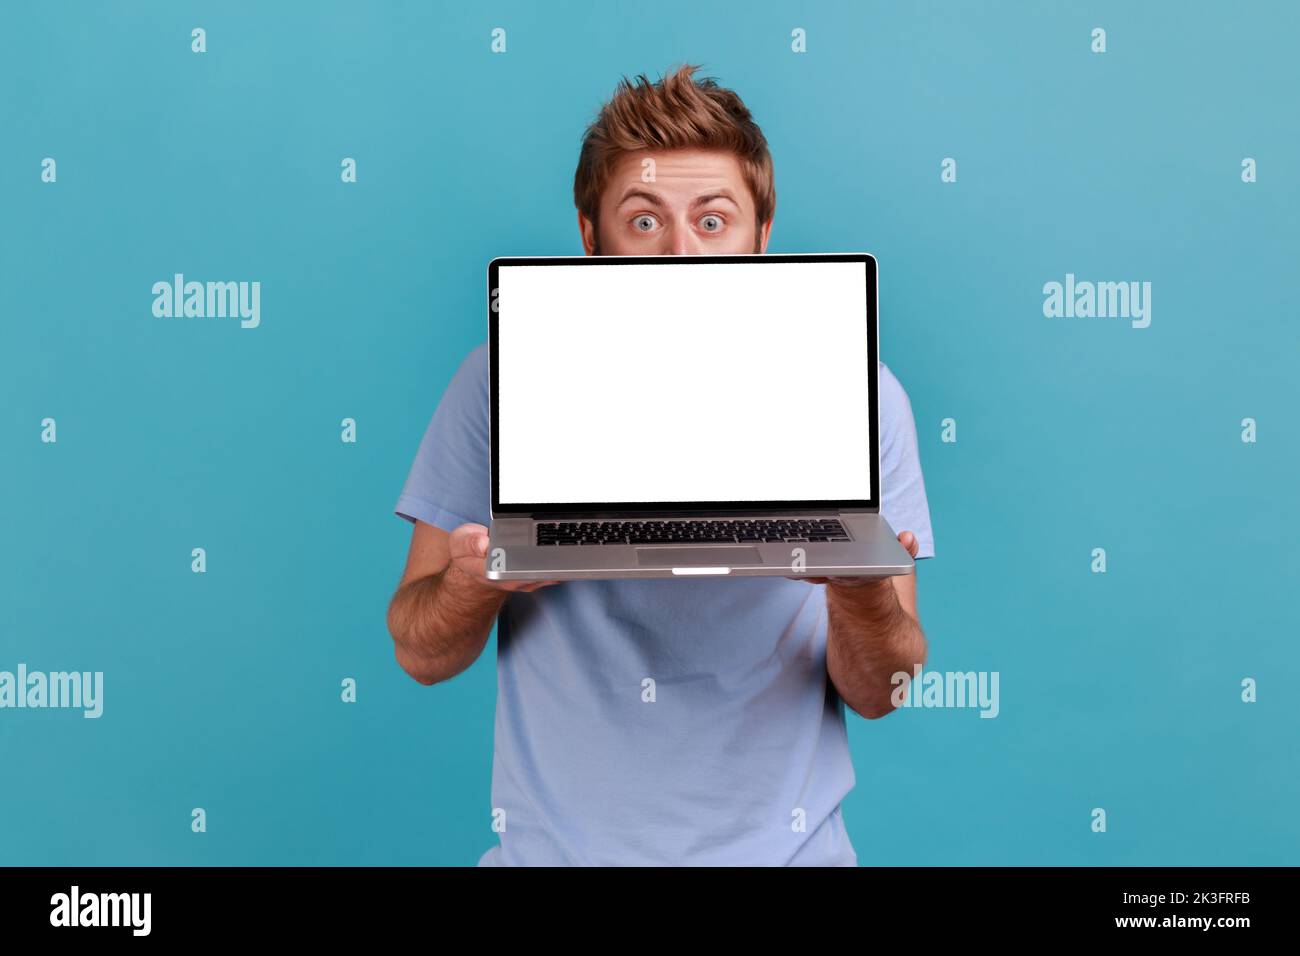 Portrait of man hiding behind white empty screen laptop, surprised with advertising area, looking at camera with big eyes, updating operation system. Indoor studio shot isolated on blue background. Stock Photo